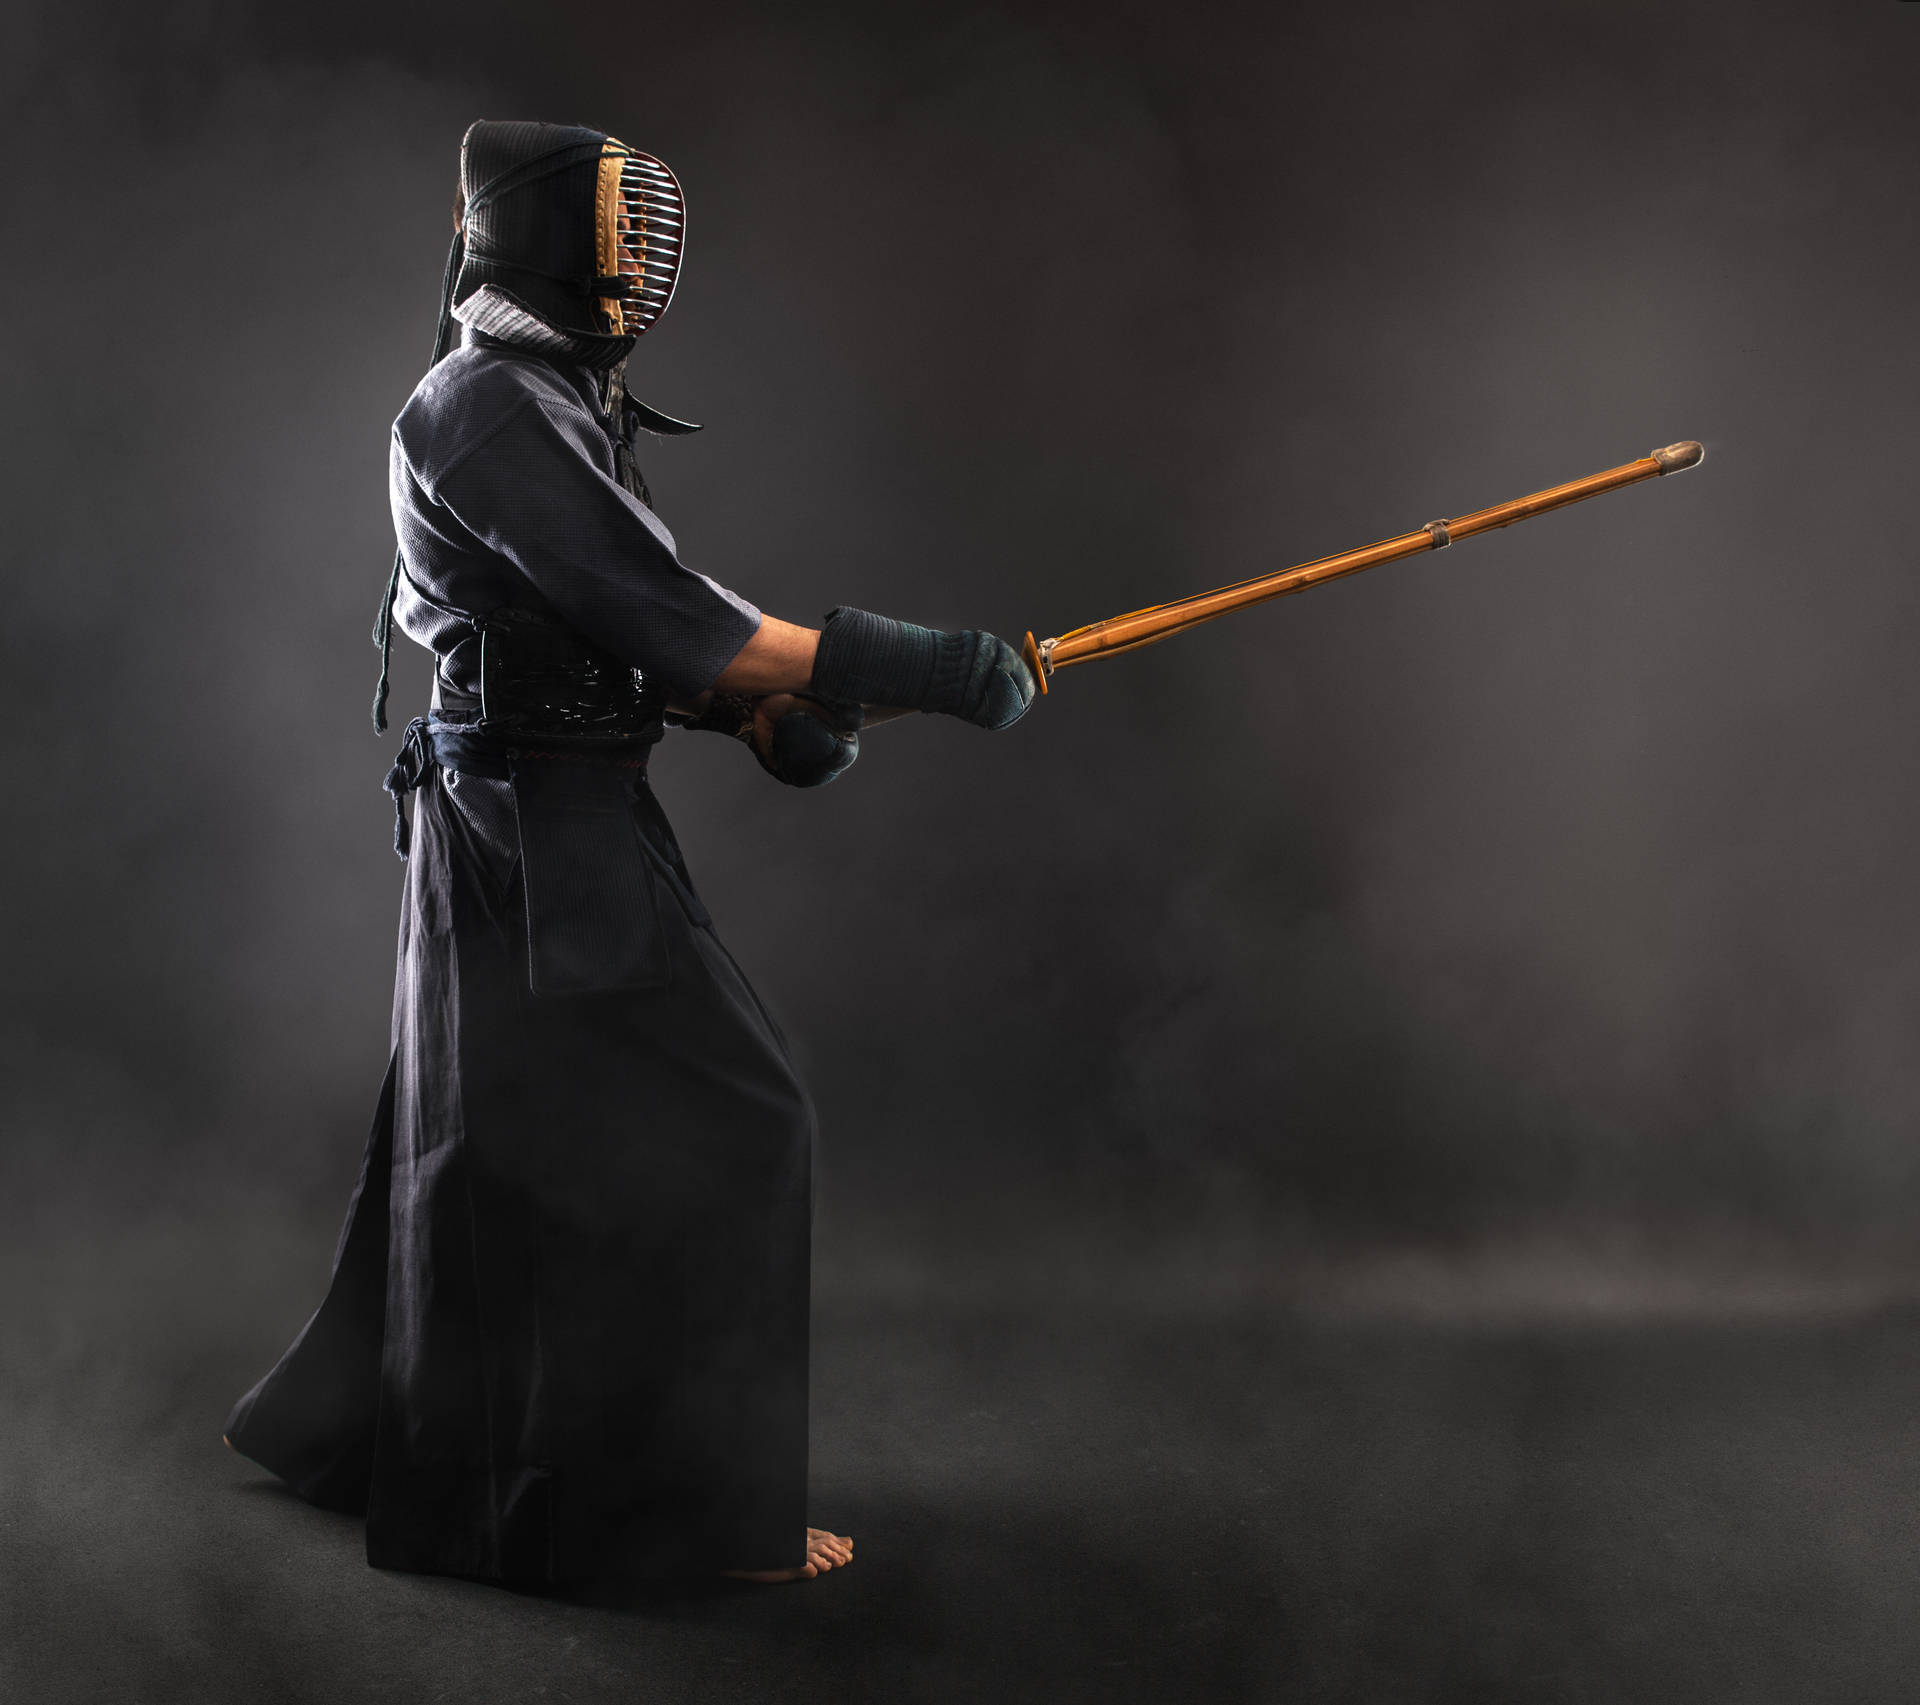 Duel of Determination - A Kendo Fighter in Action Wallpaper